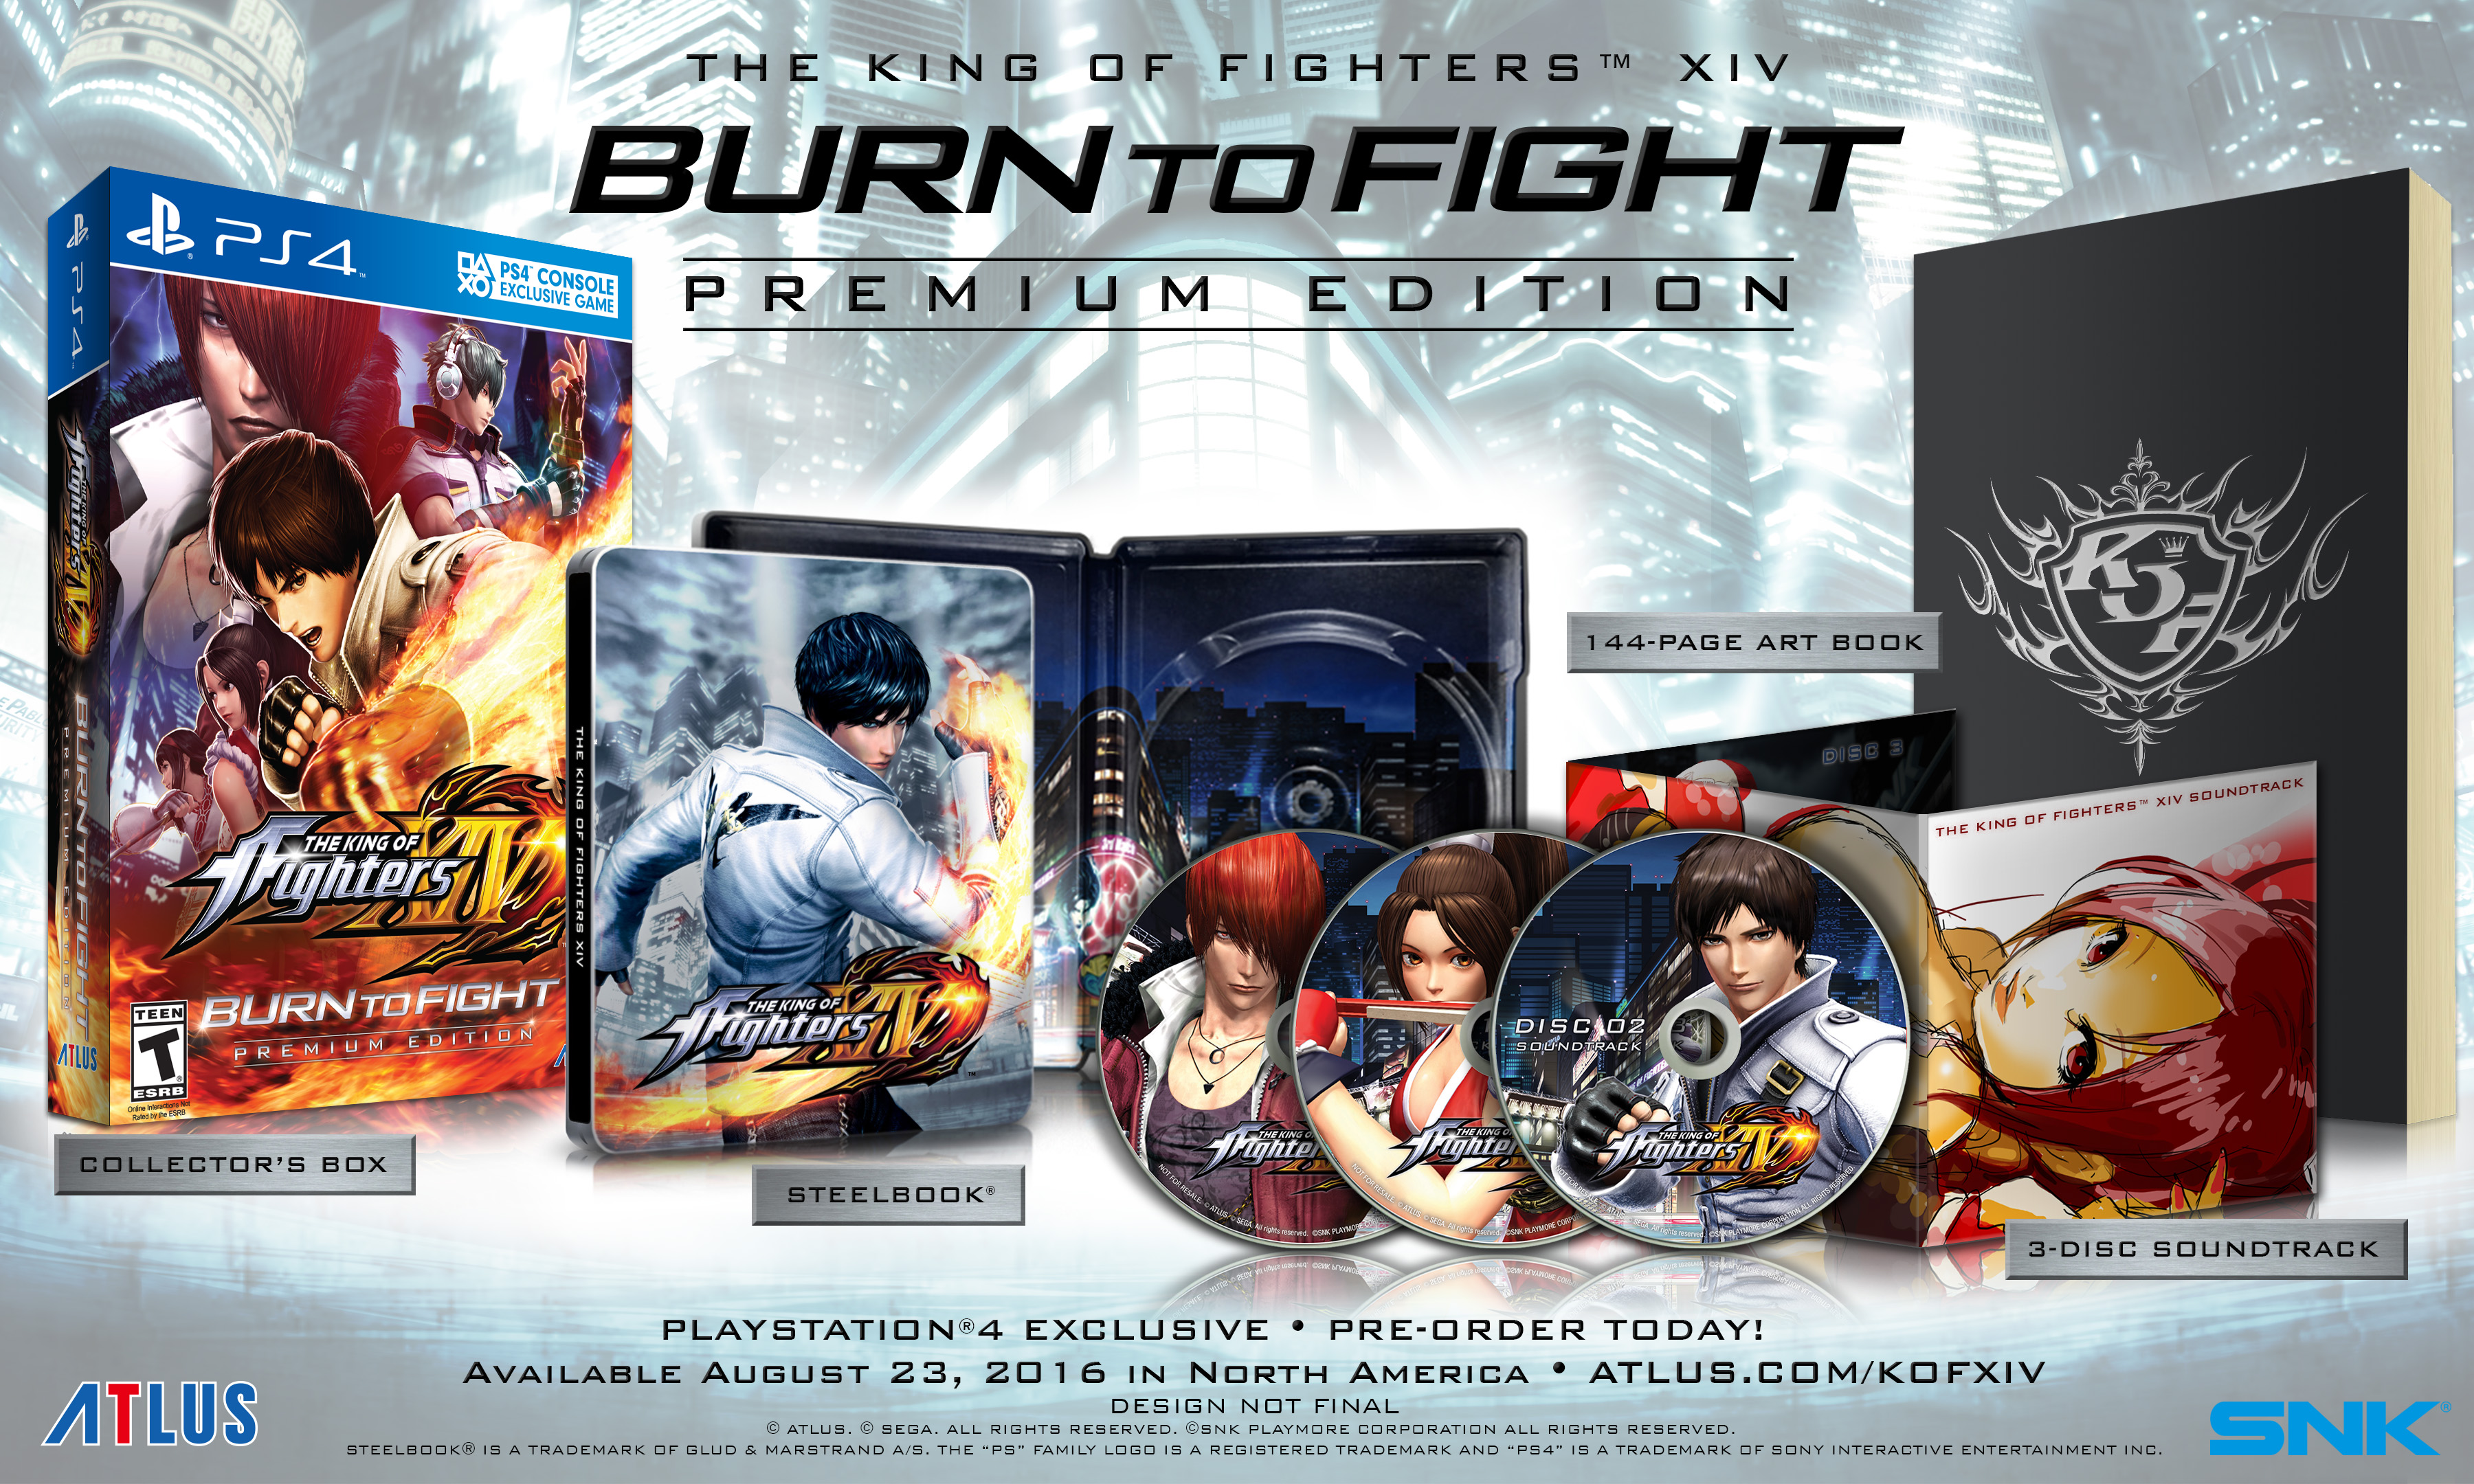 The King of Fighters XIV - Premium "Burn to Fight" Edition